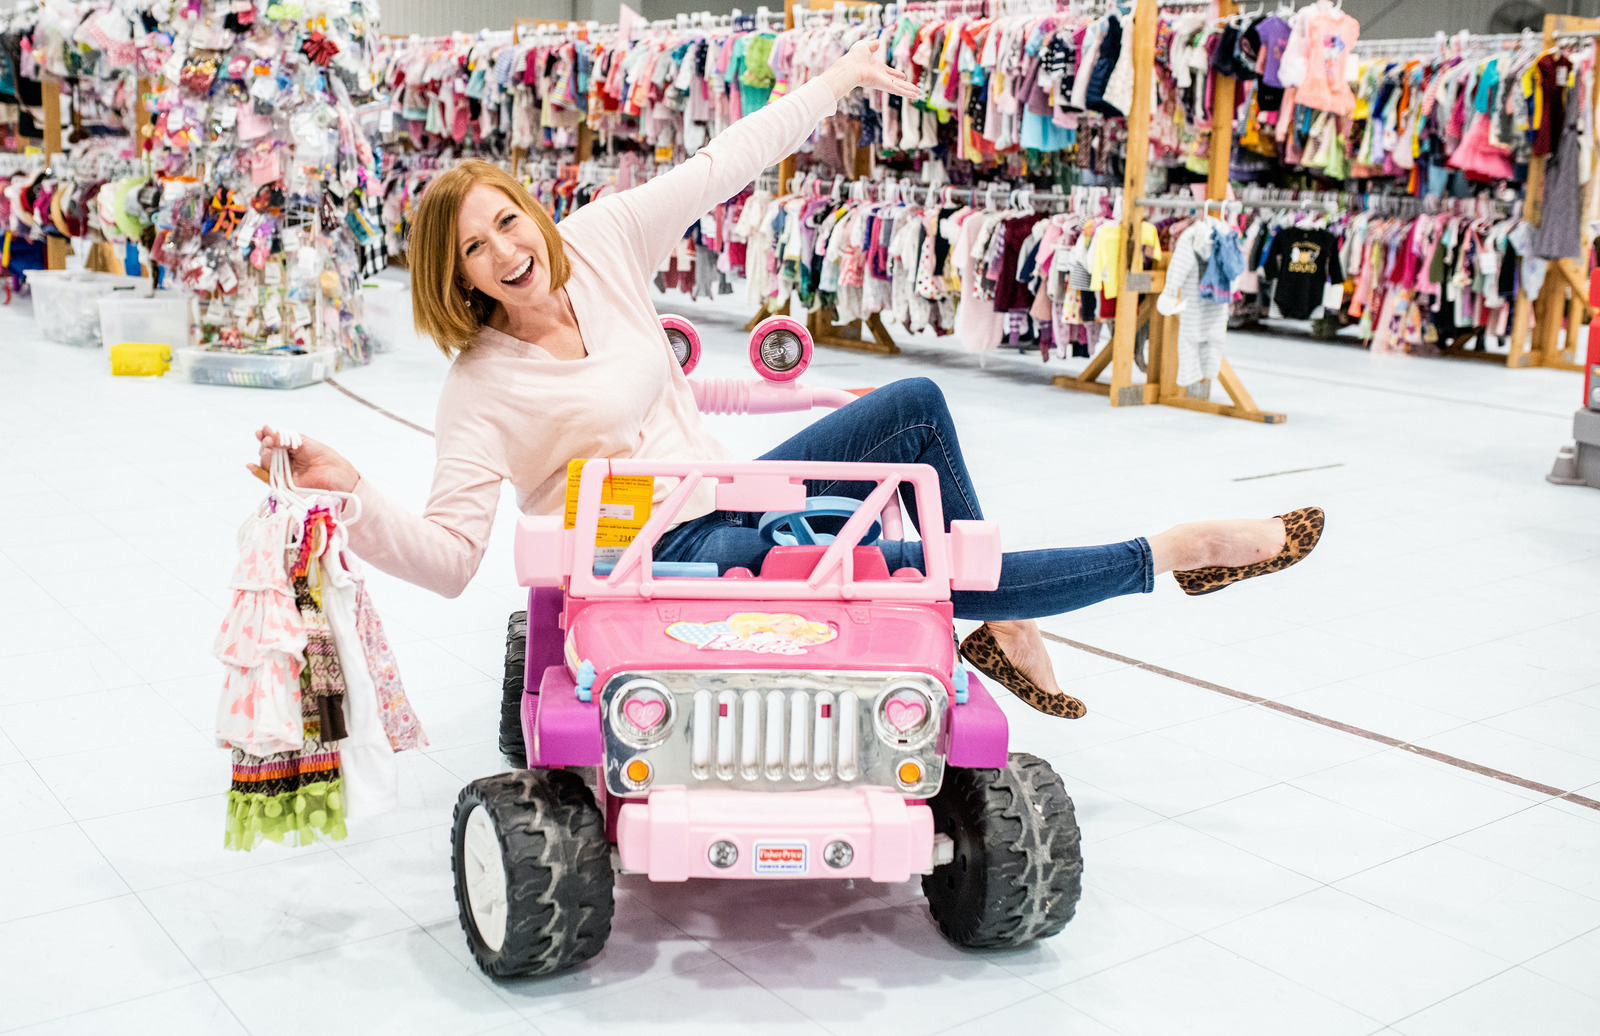 A mom sitting on toy jeep, smiling and holding children's clothing. 